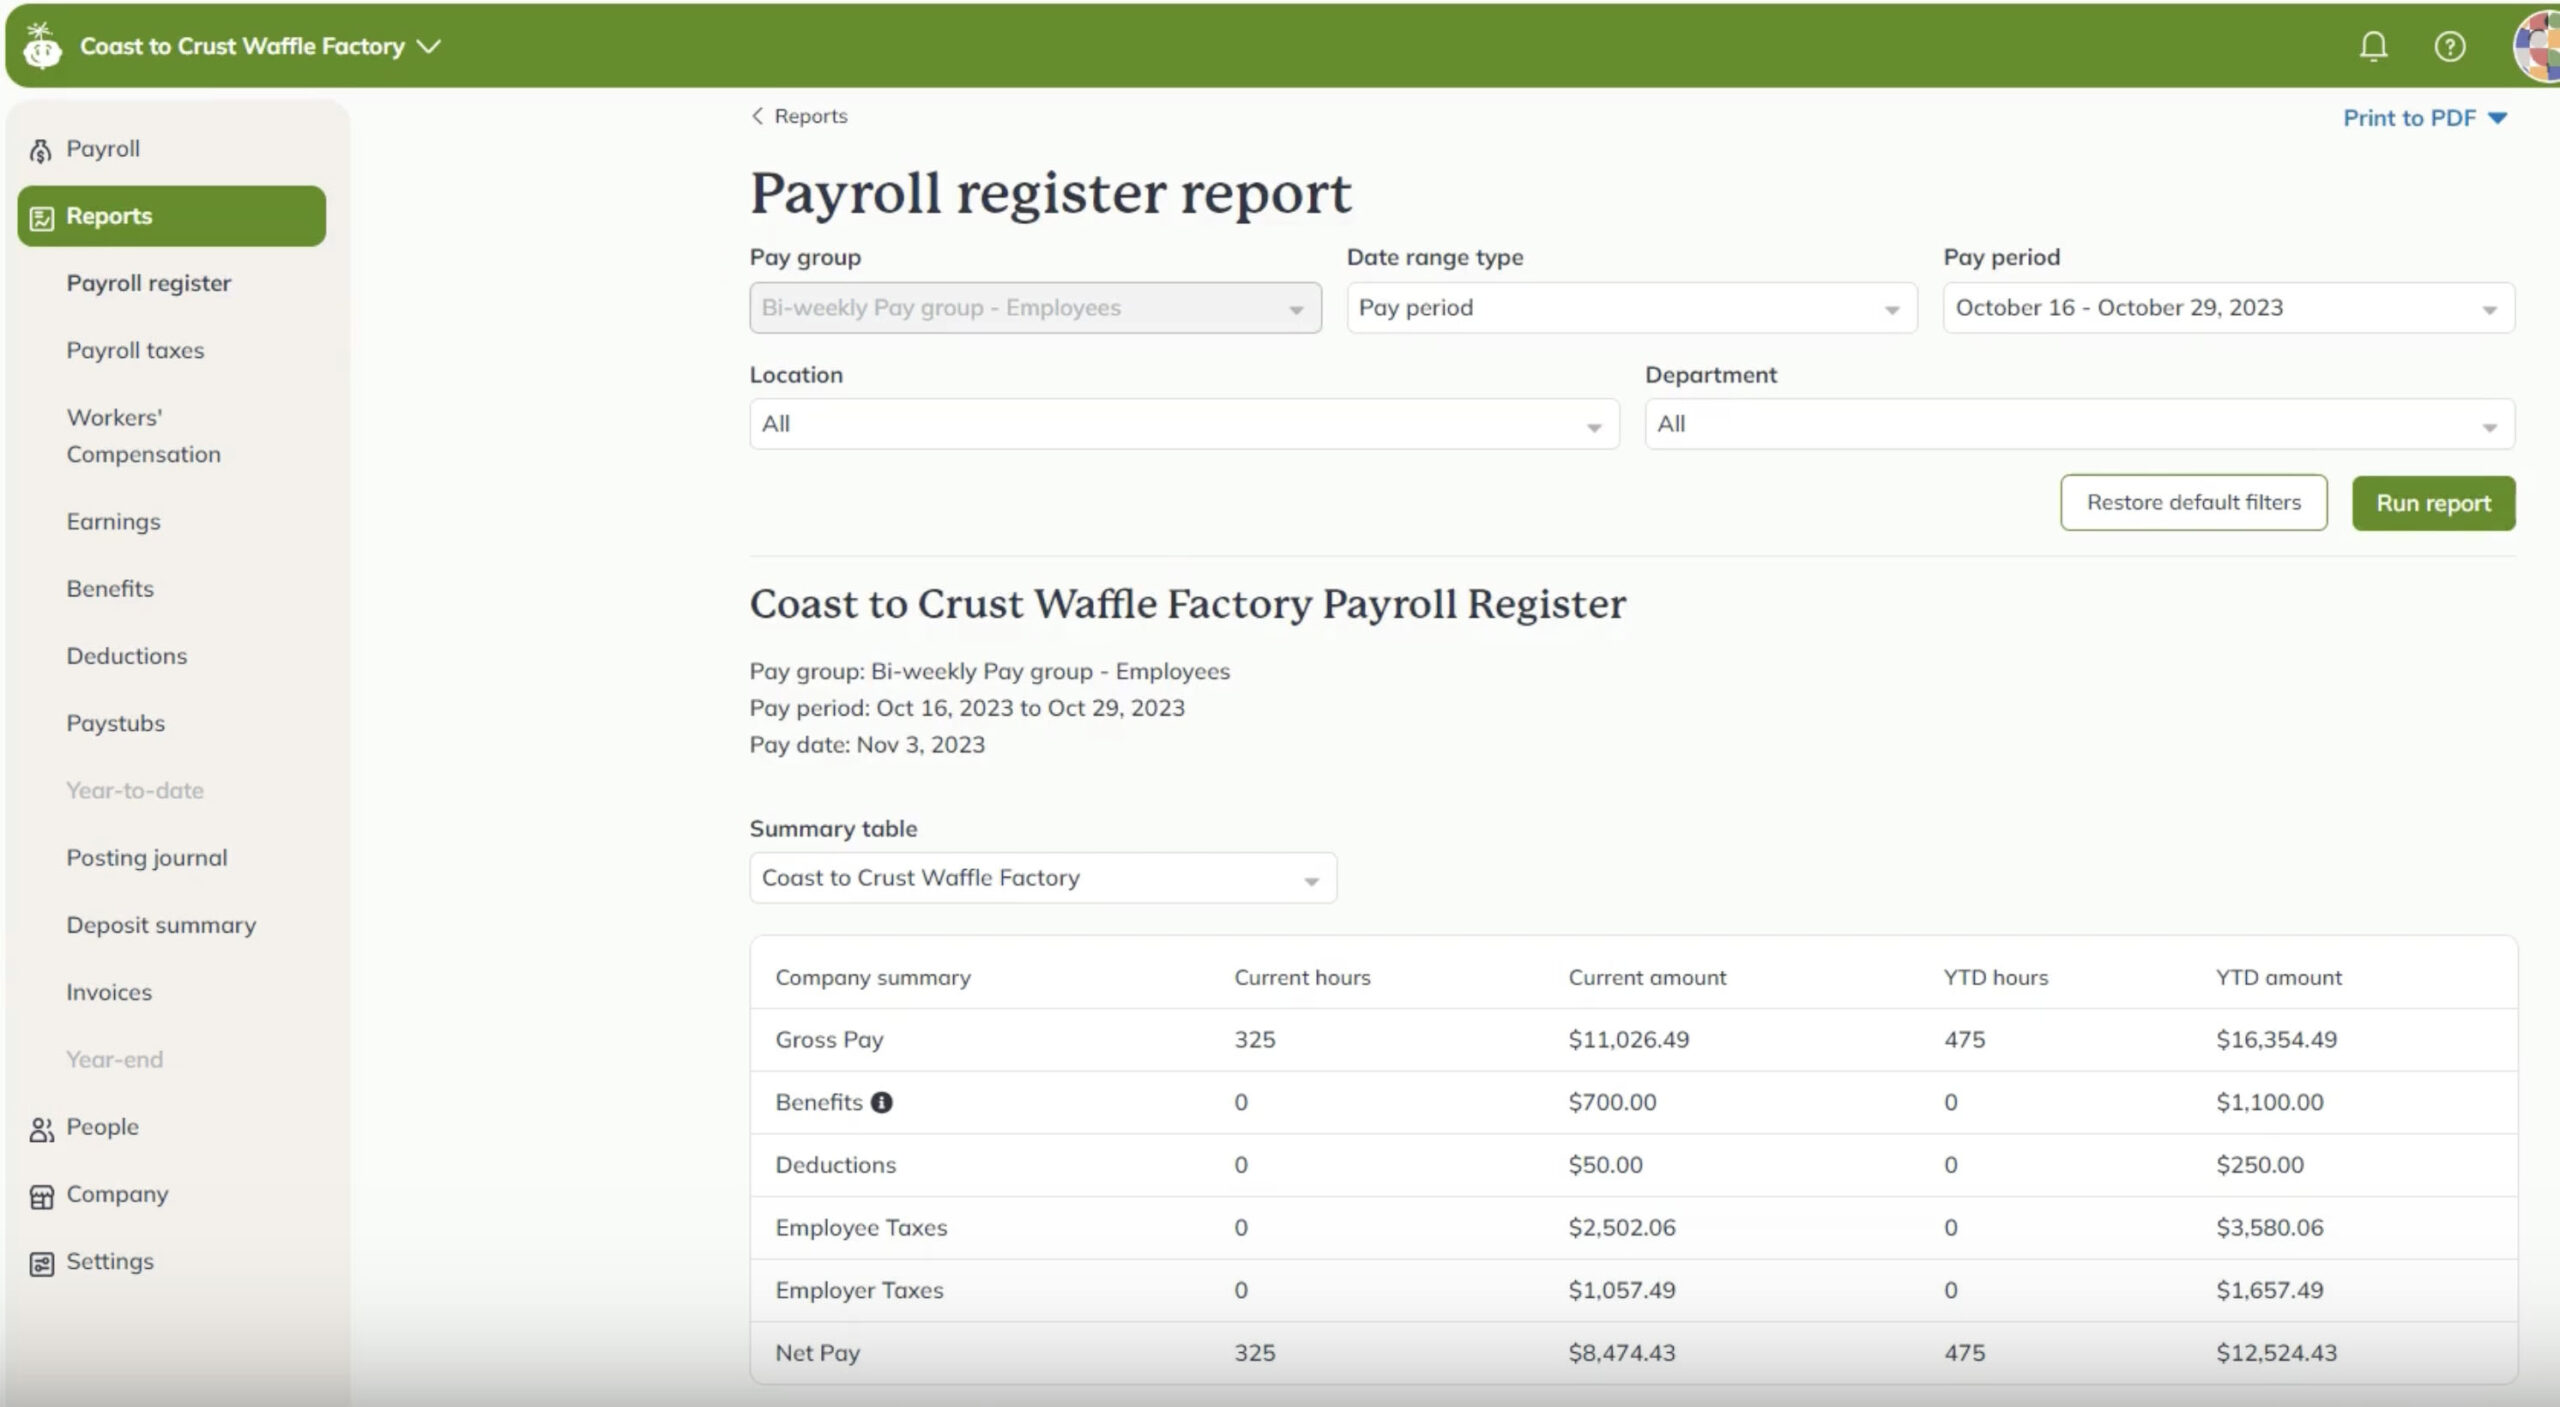 The image shows the Reports section of the Wagepoint Payroll interface. Along the lefthand side is a navigation bar. To the right is the Payroll register report, which filter options including by pay group, date range, pay period, location and department.